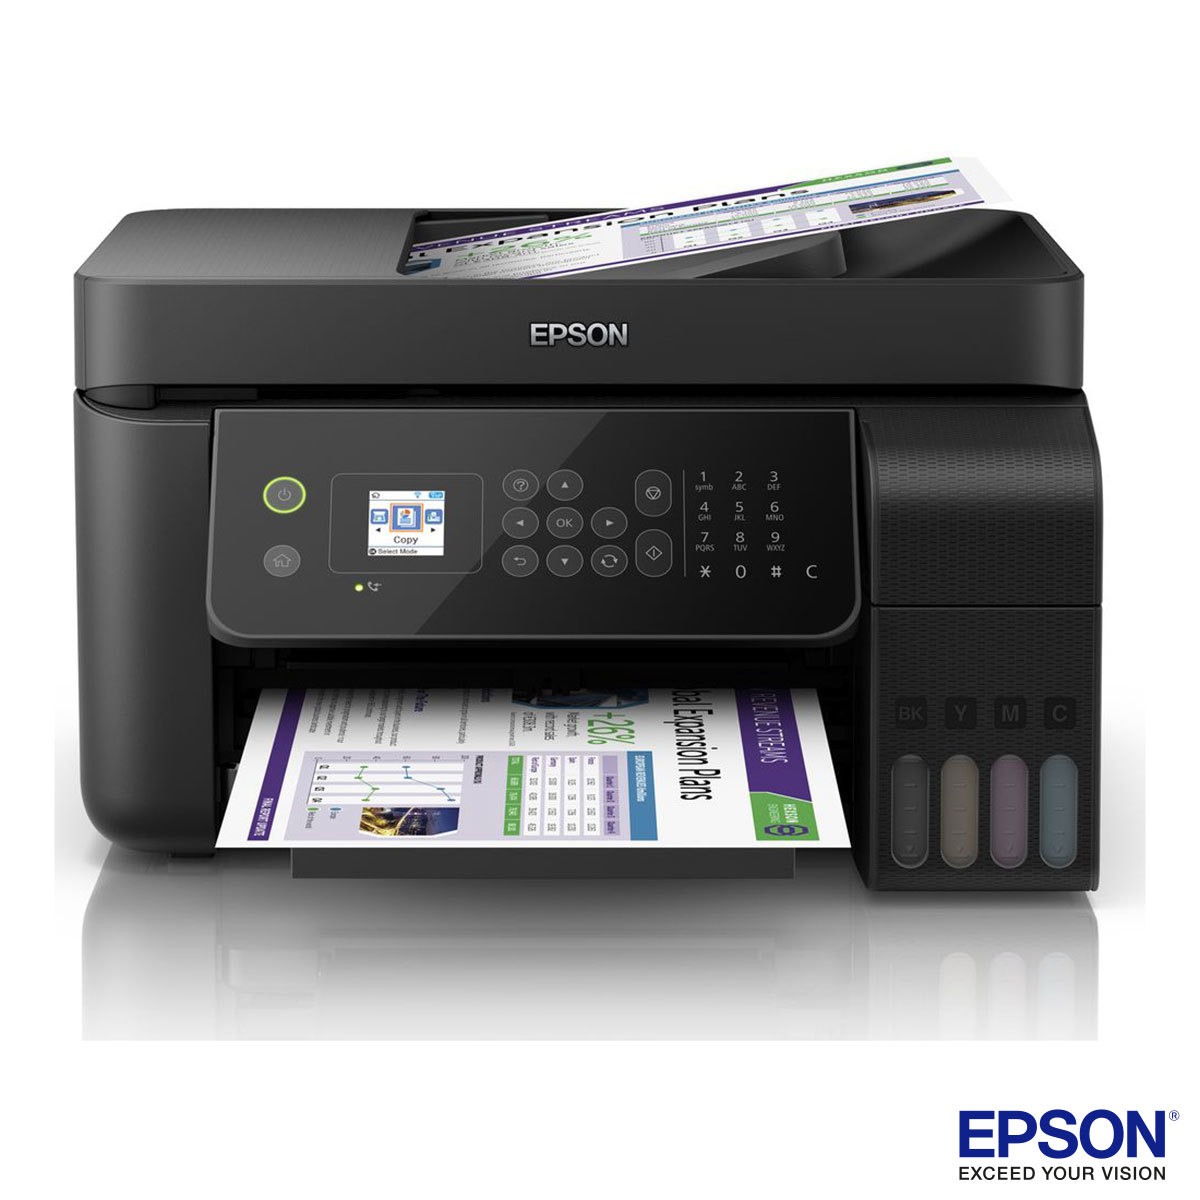 Buy Epson EcoTank ET-4700B Unlimited All in One Wireless Printer at costco.co.uk